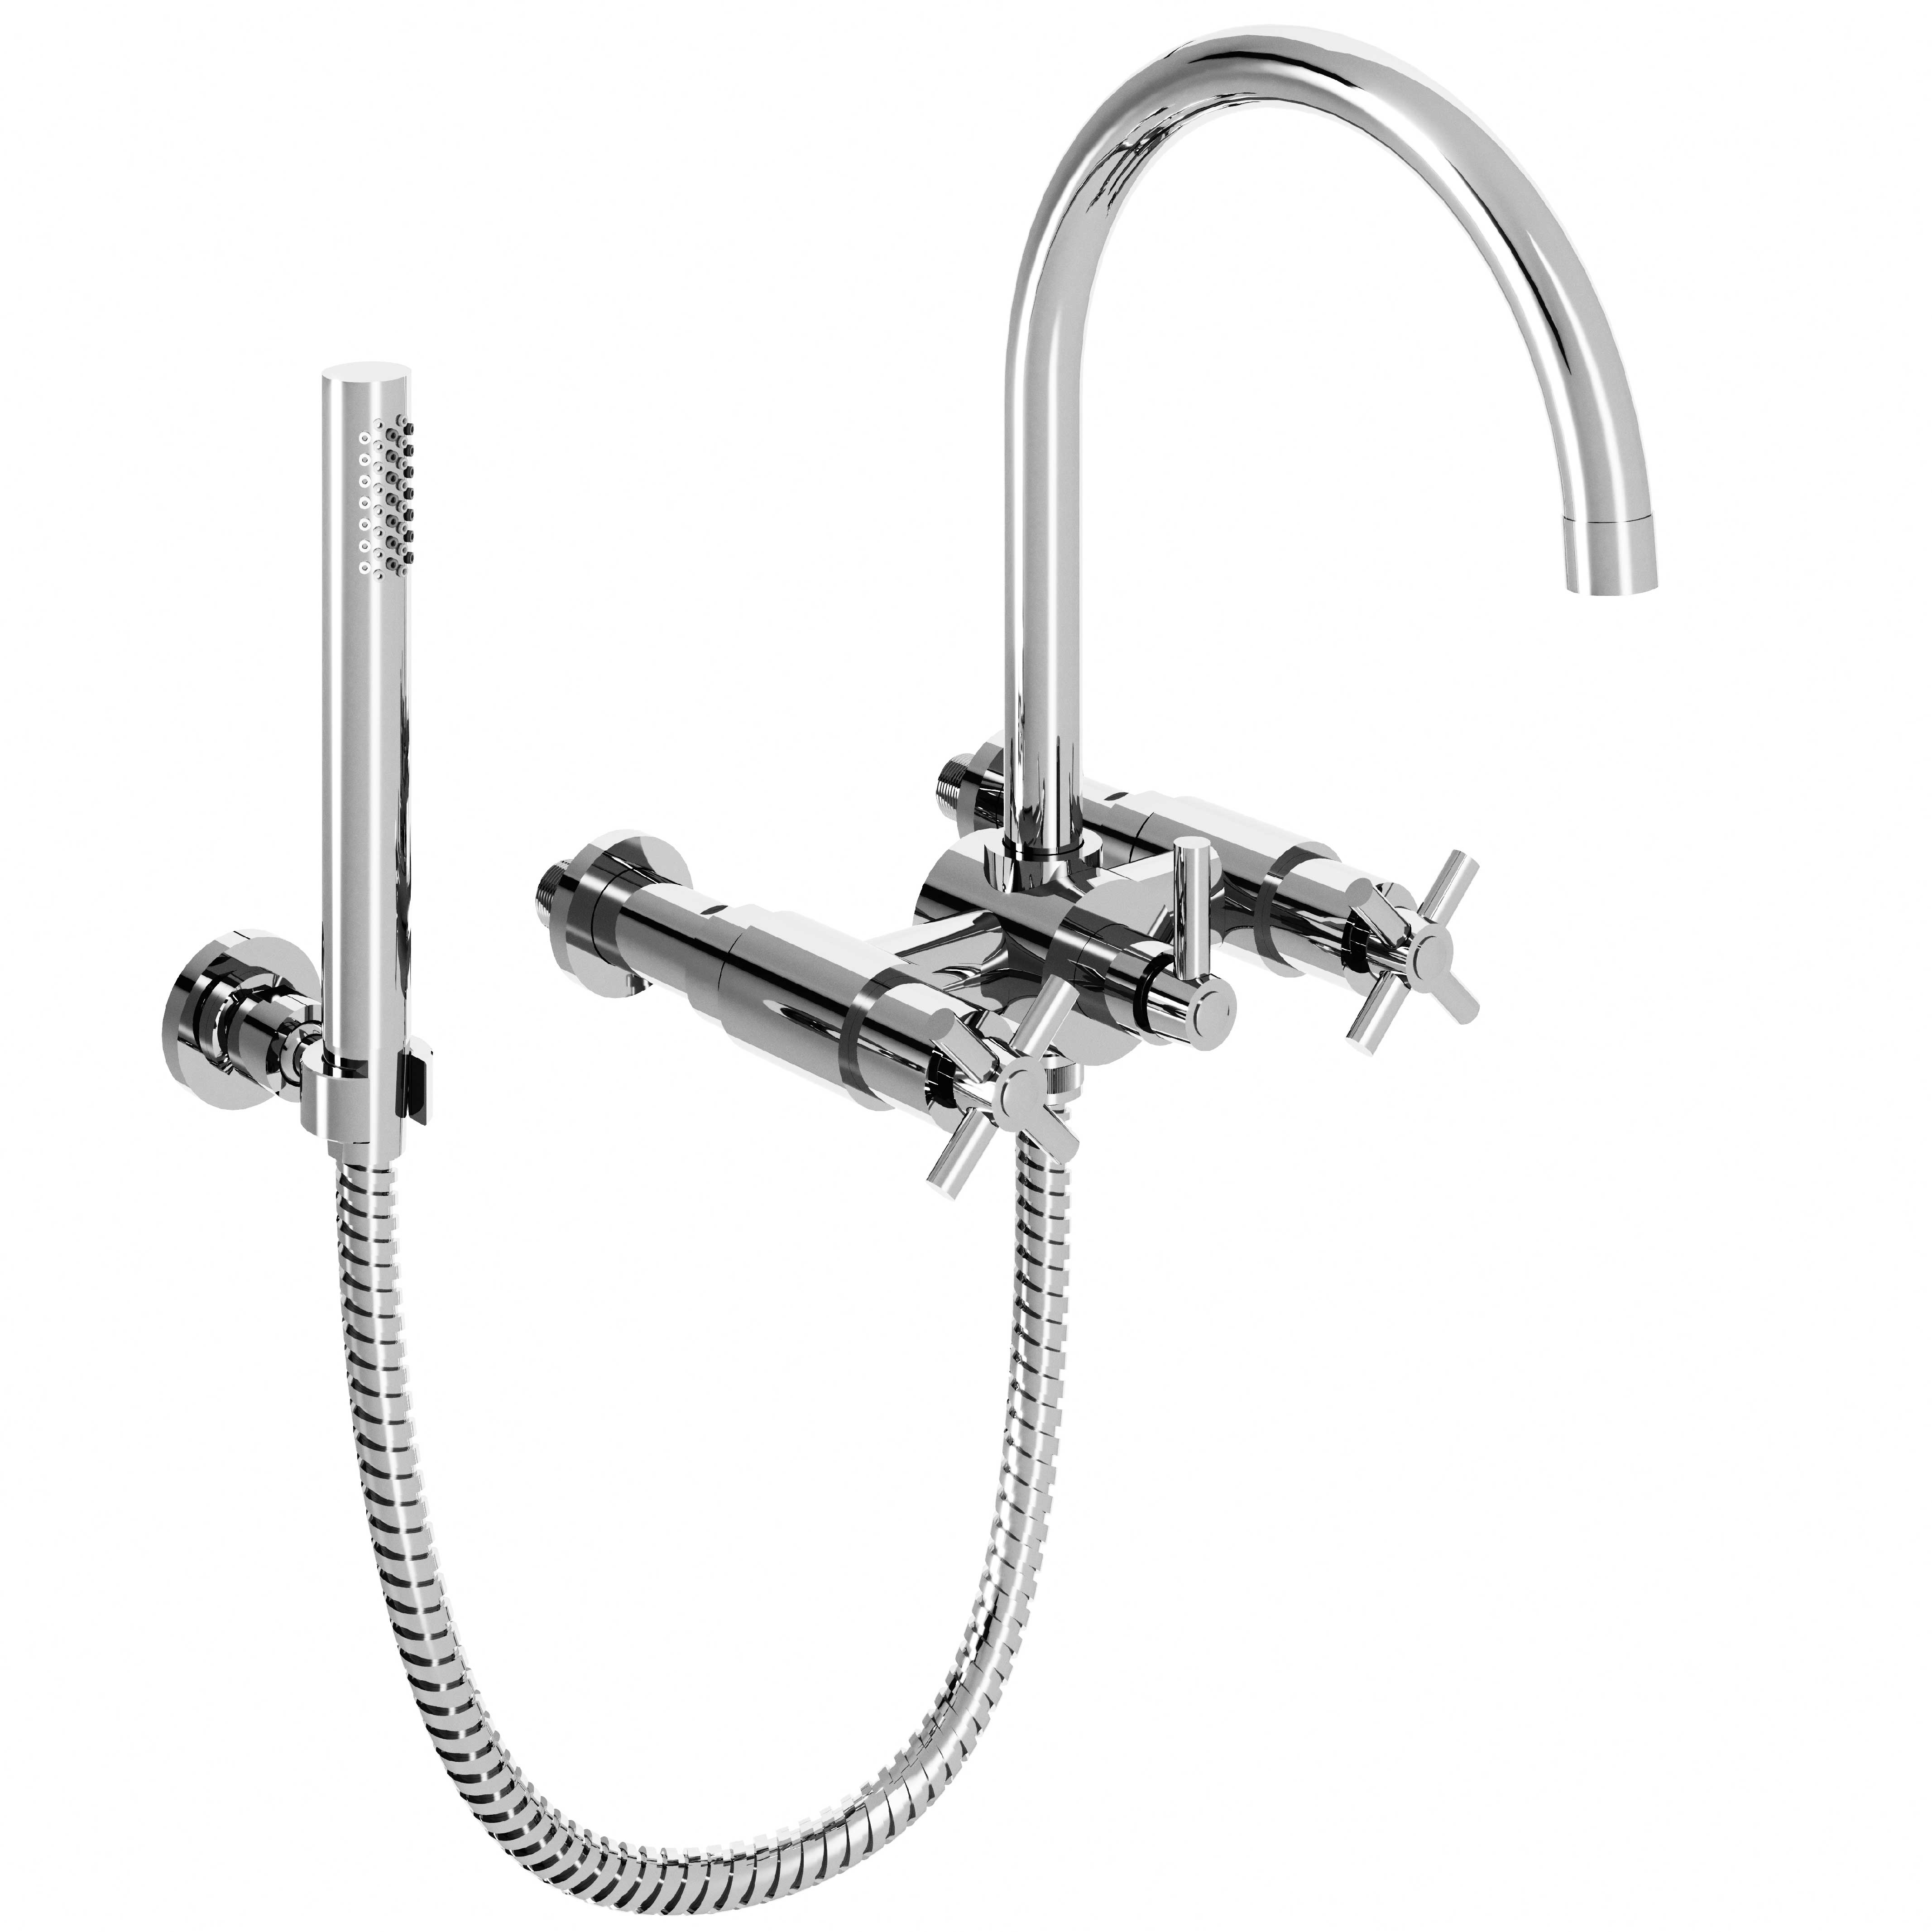 M90-3201 Wall mounted bath and shower mixer